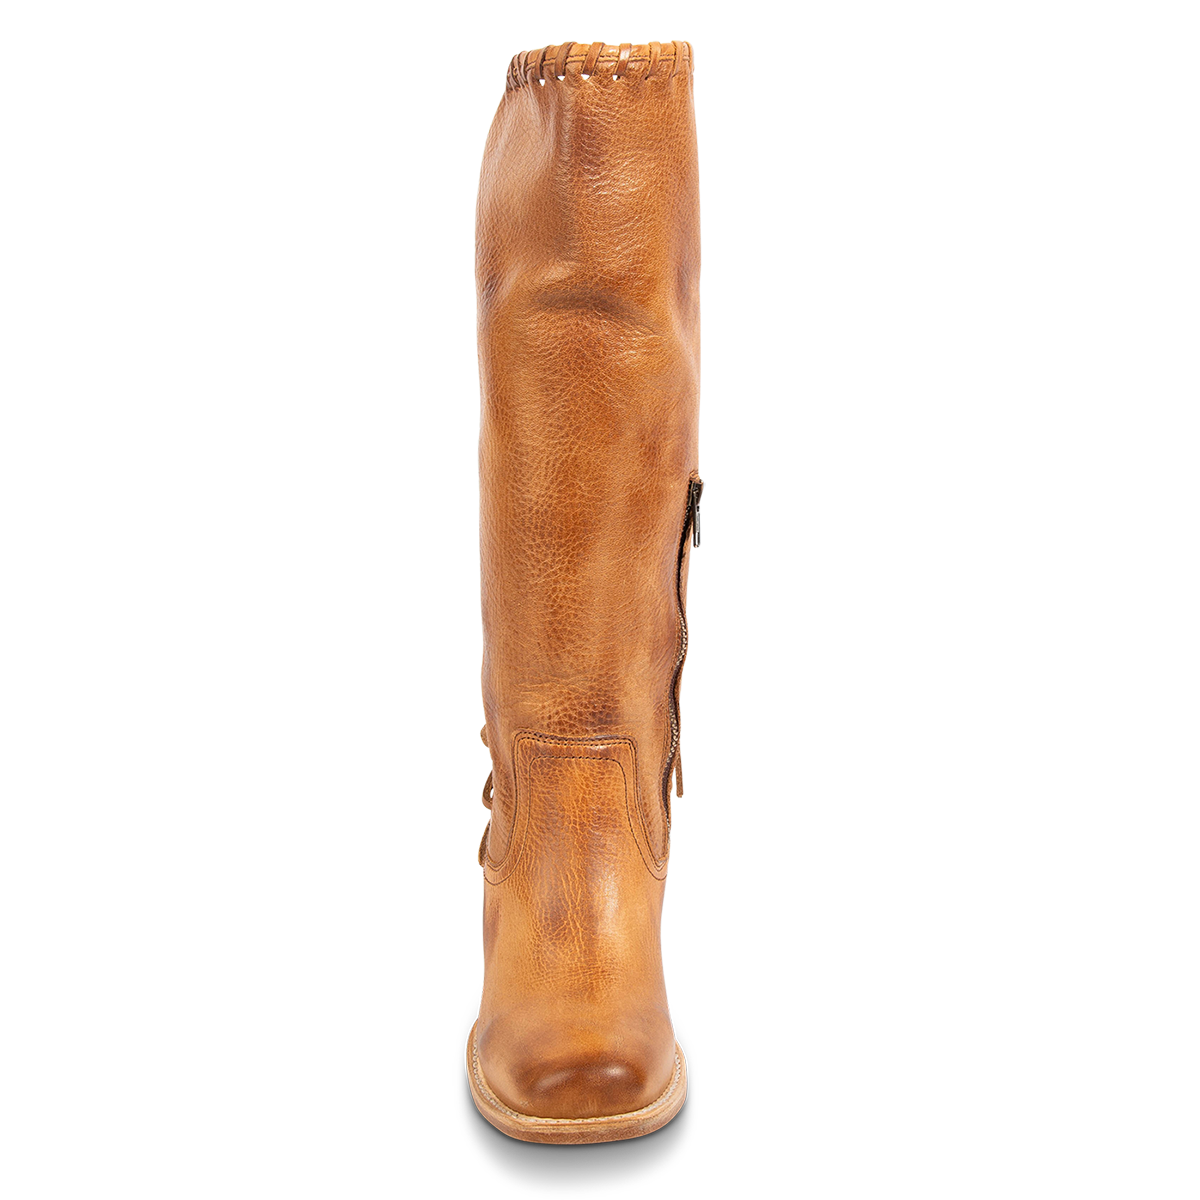 Front view showing FREEBIRD women's Dillon wheat leather boot with 100% full grain leather, whip stitch edge detailing and adjustable back leather lacing.